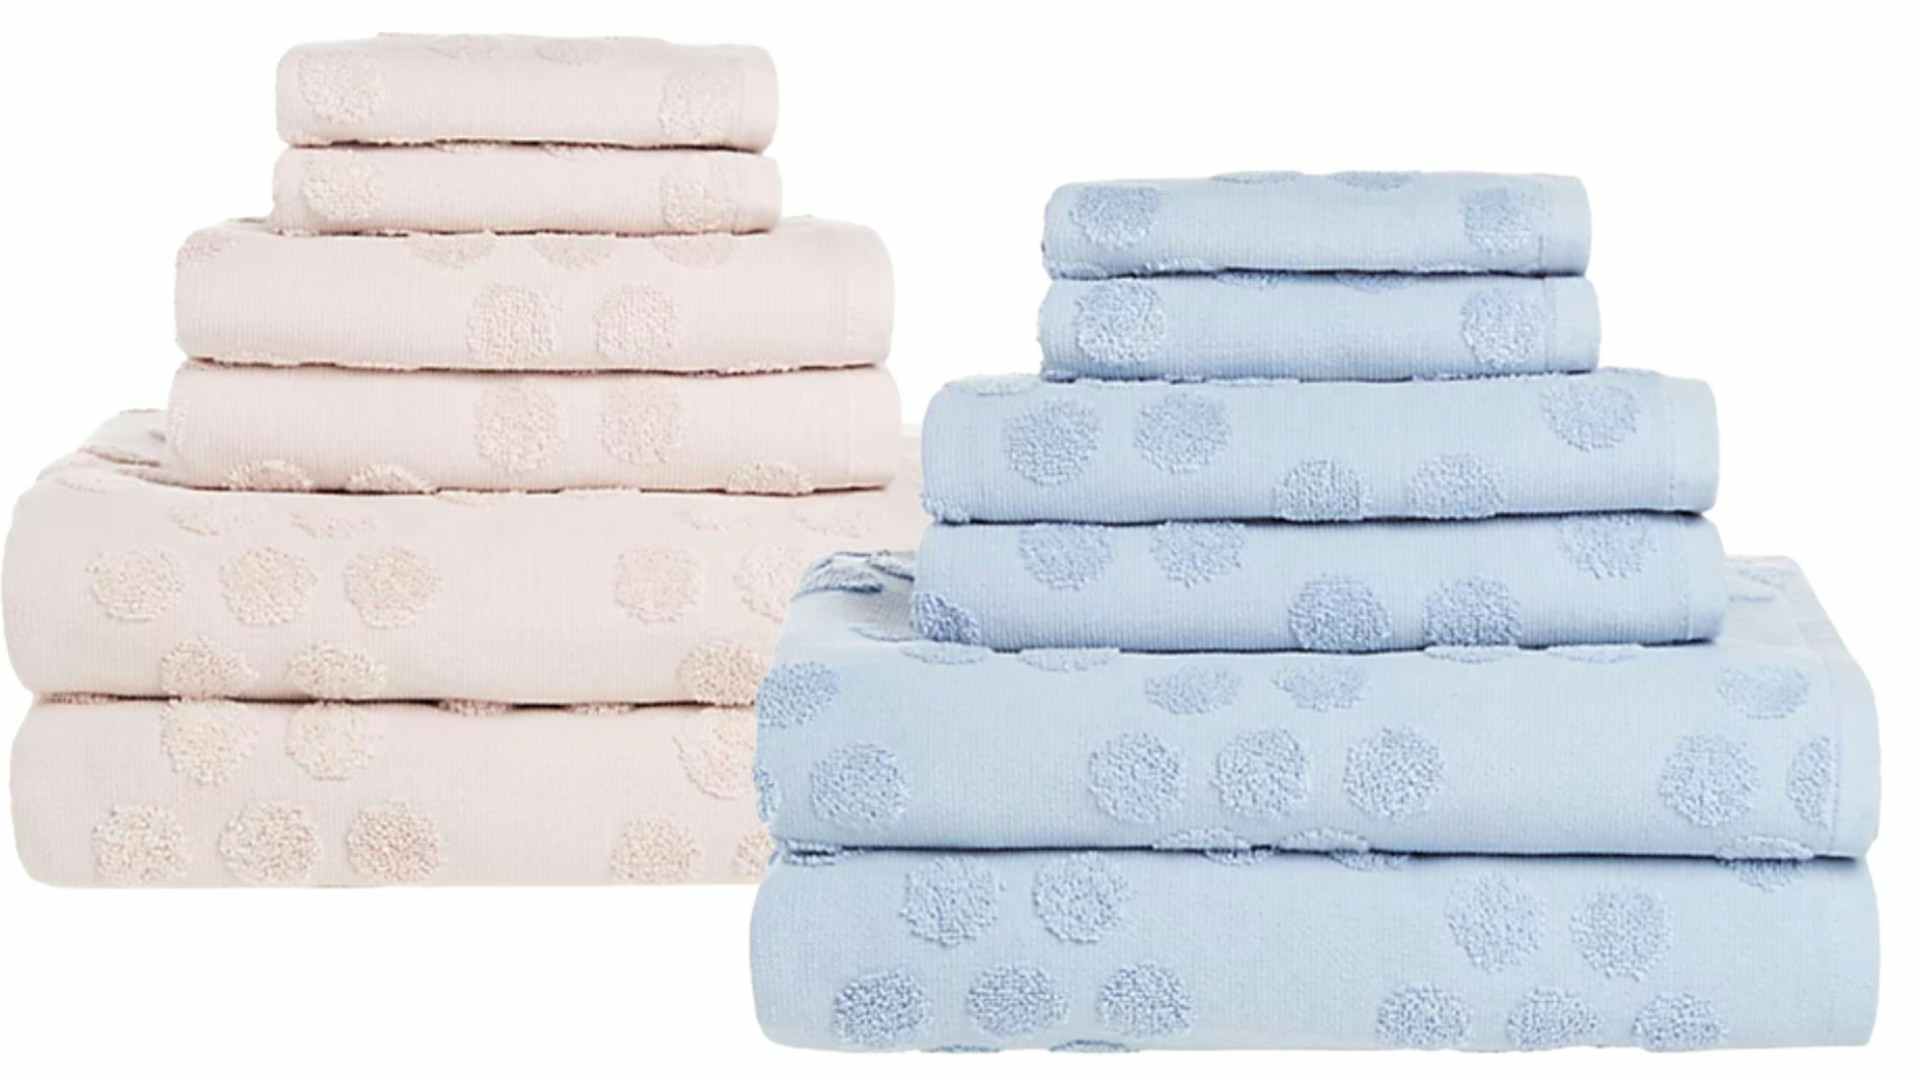 6 piece towel sets from bed bath & beyond in pink and blue